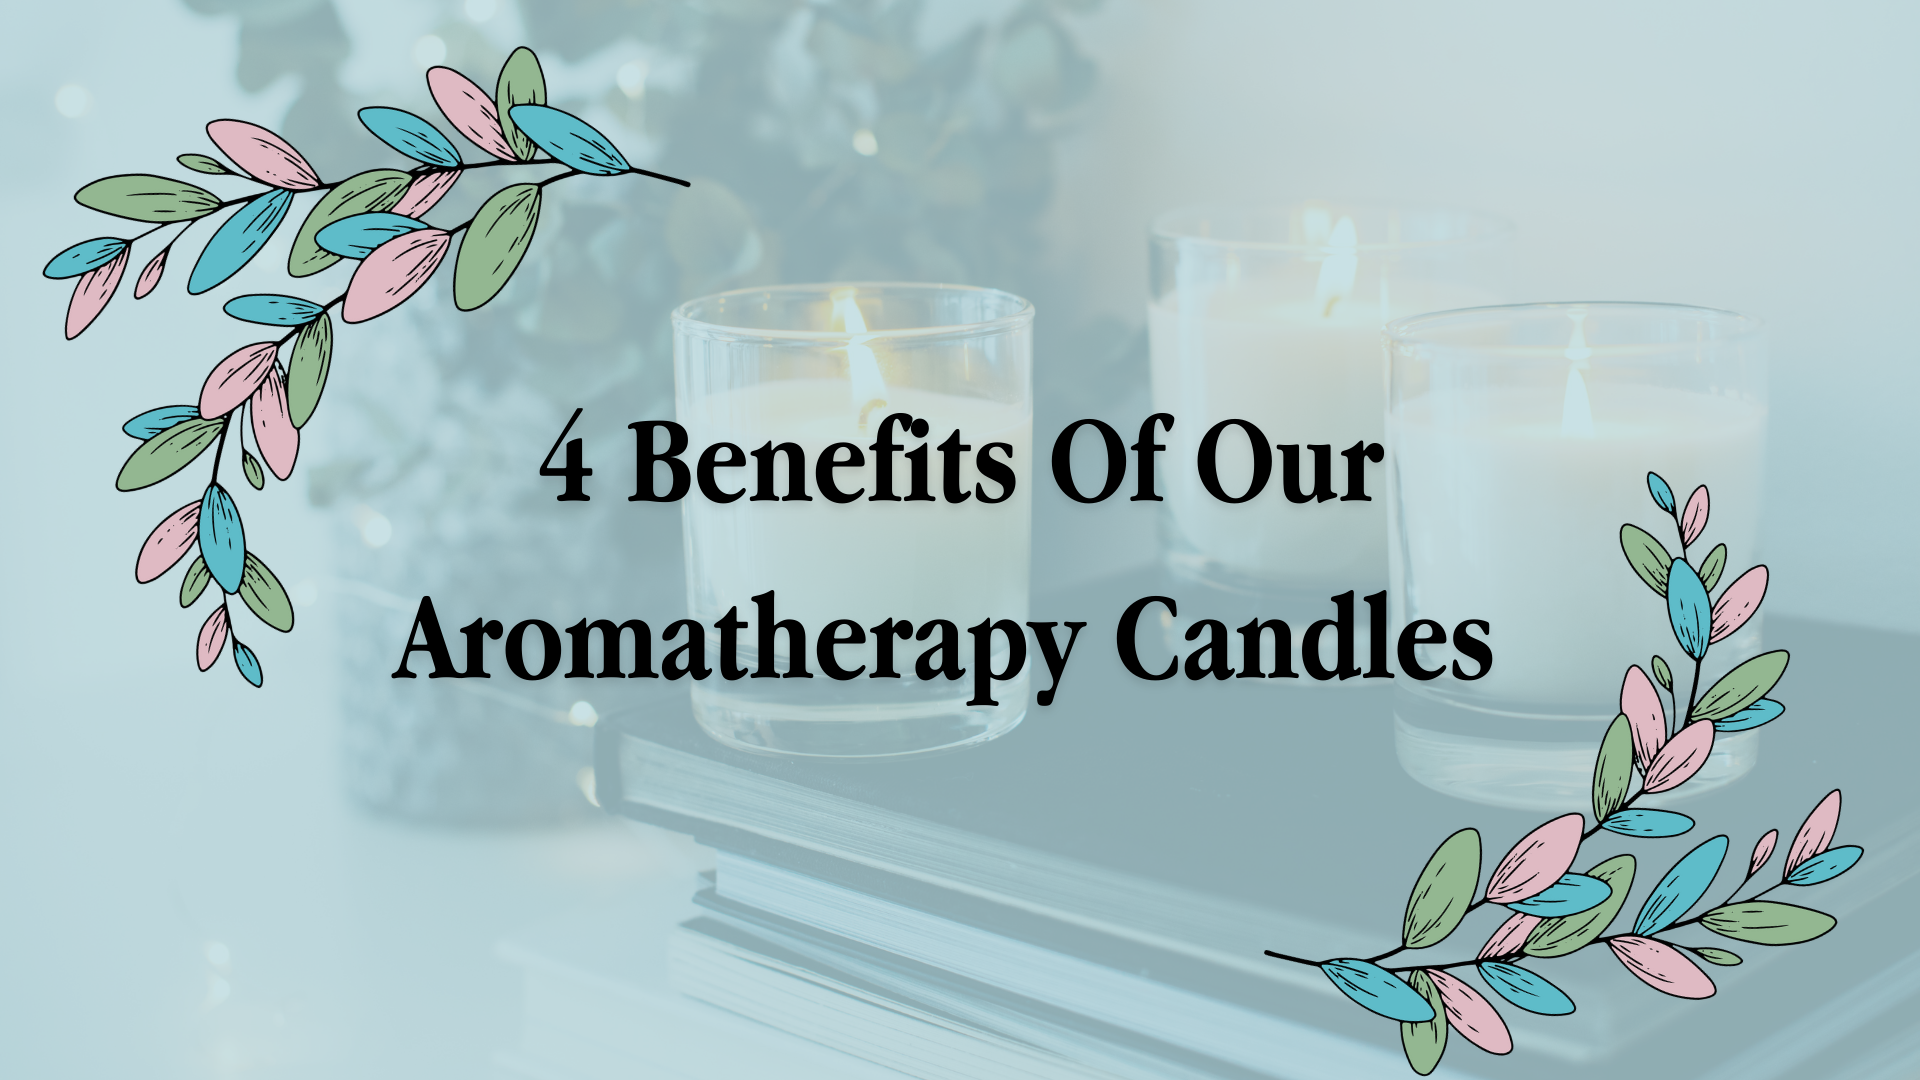 4 Benefits Of Our Aromatherapy Candles